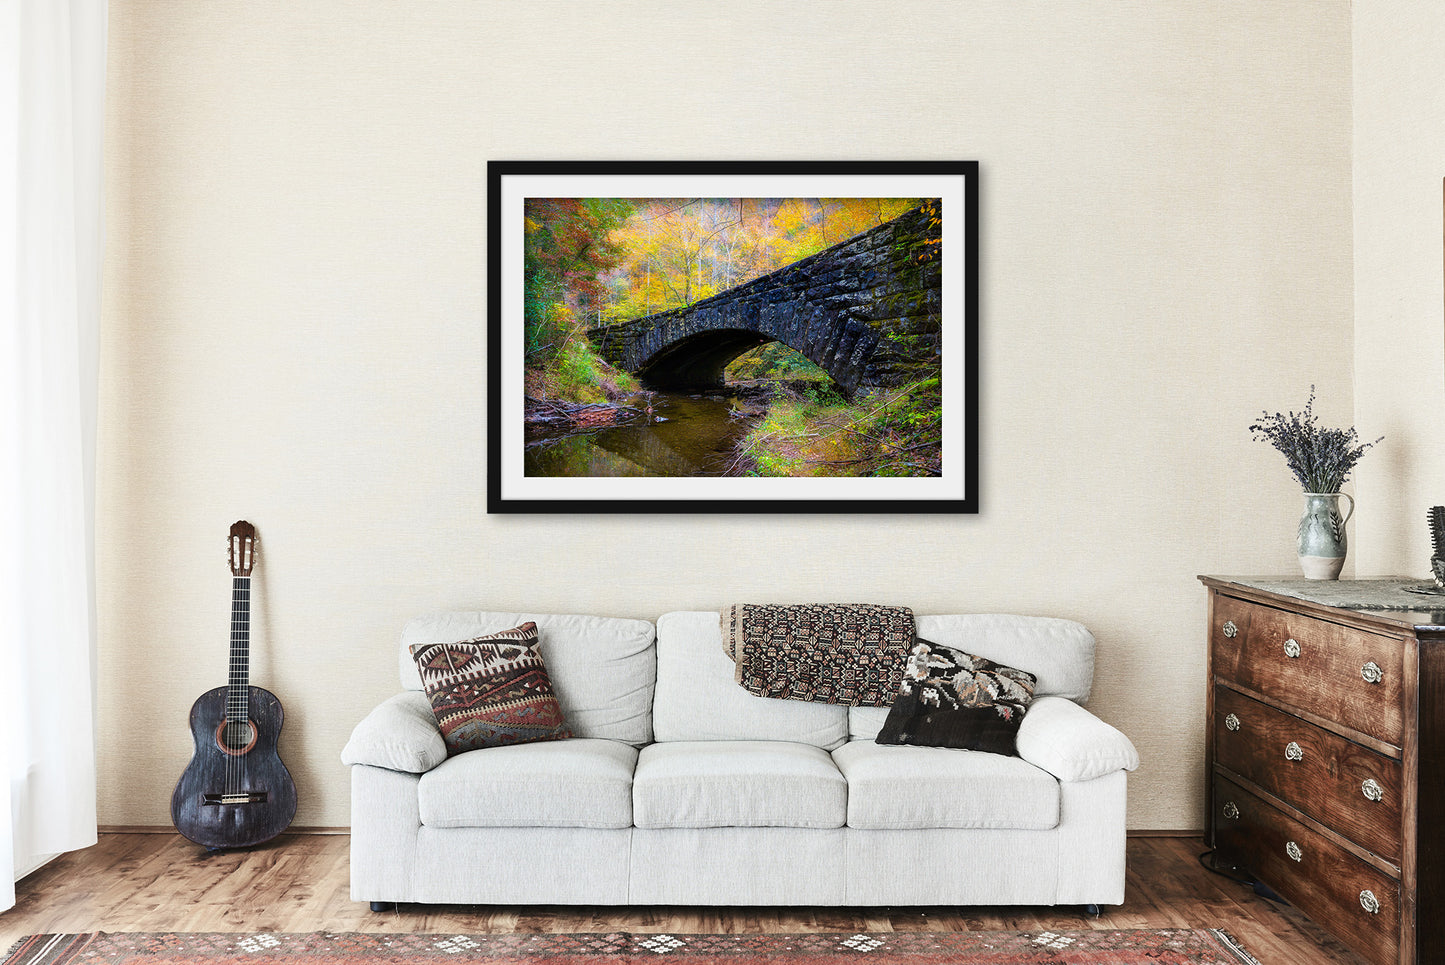 Framed and Matted Print - Picture of Stone Bridge and Fall Color on Autumn Day in Great Smoky Mountains Tennessee Nature Wall Art Decor